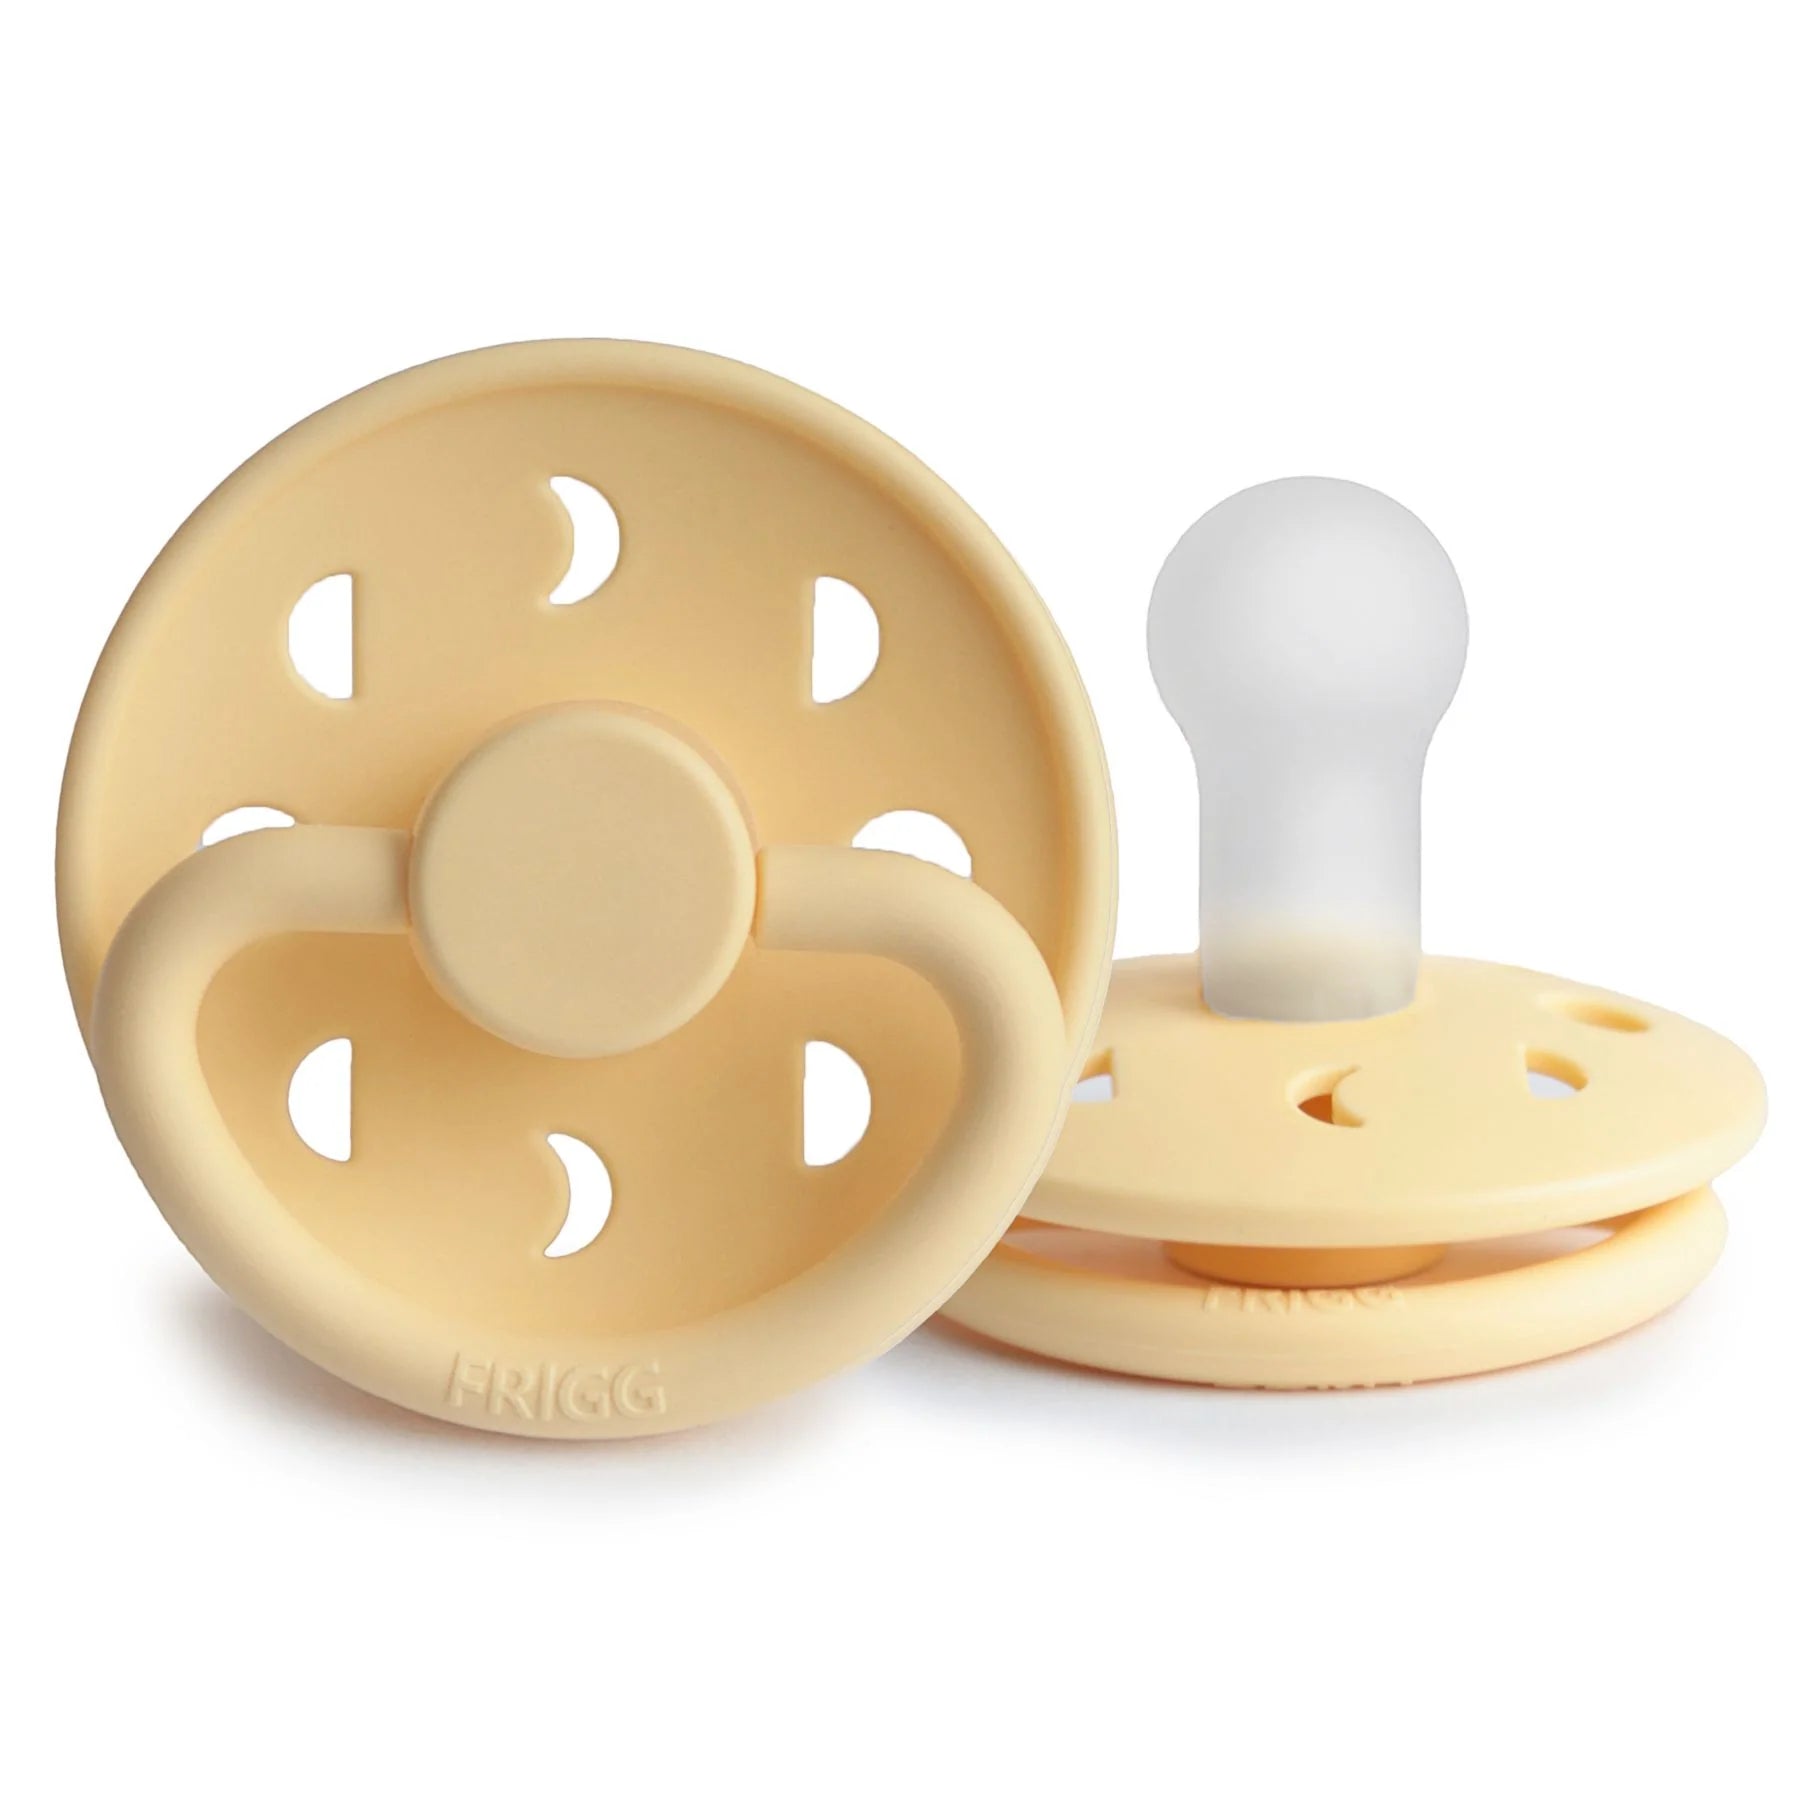 Moon Phase Silicone Pacifier - Pale Daffodil